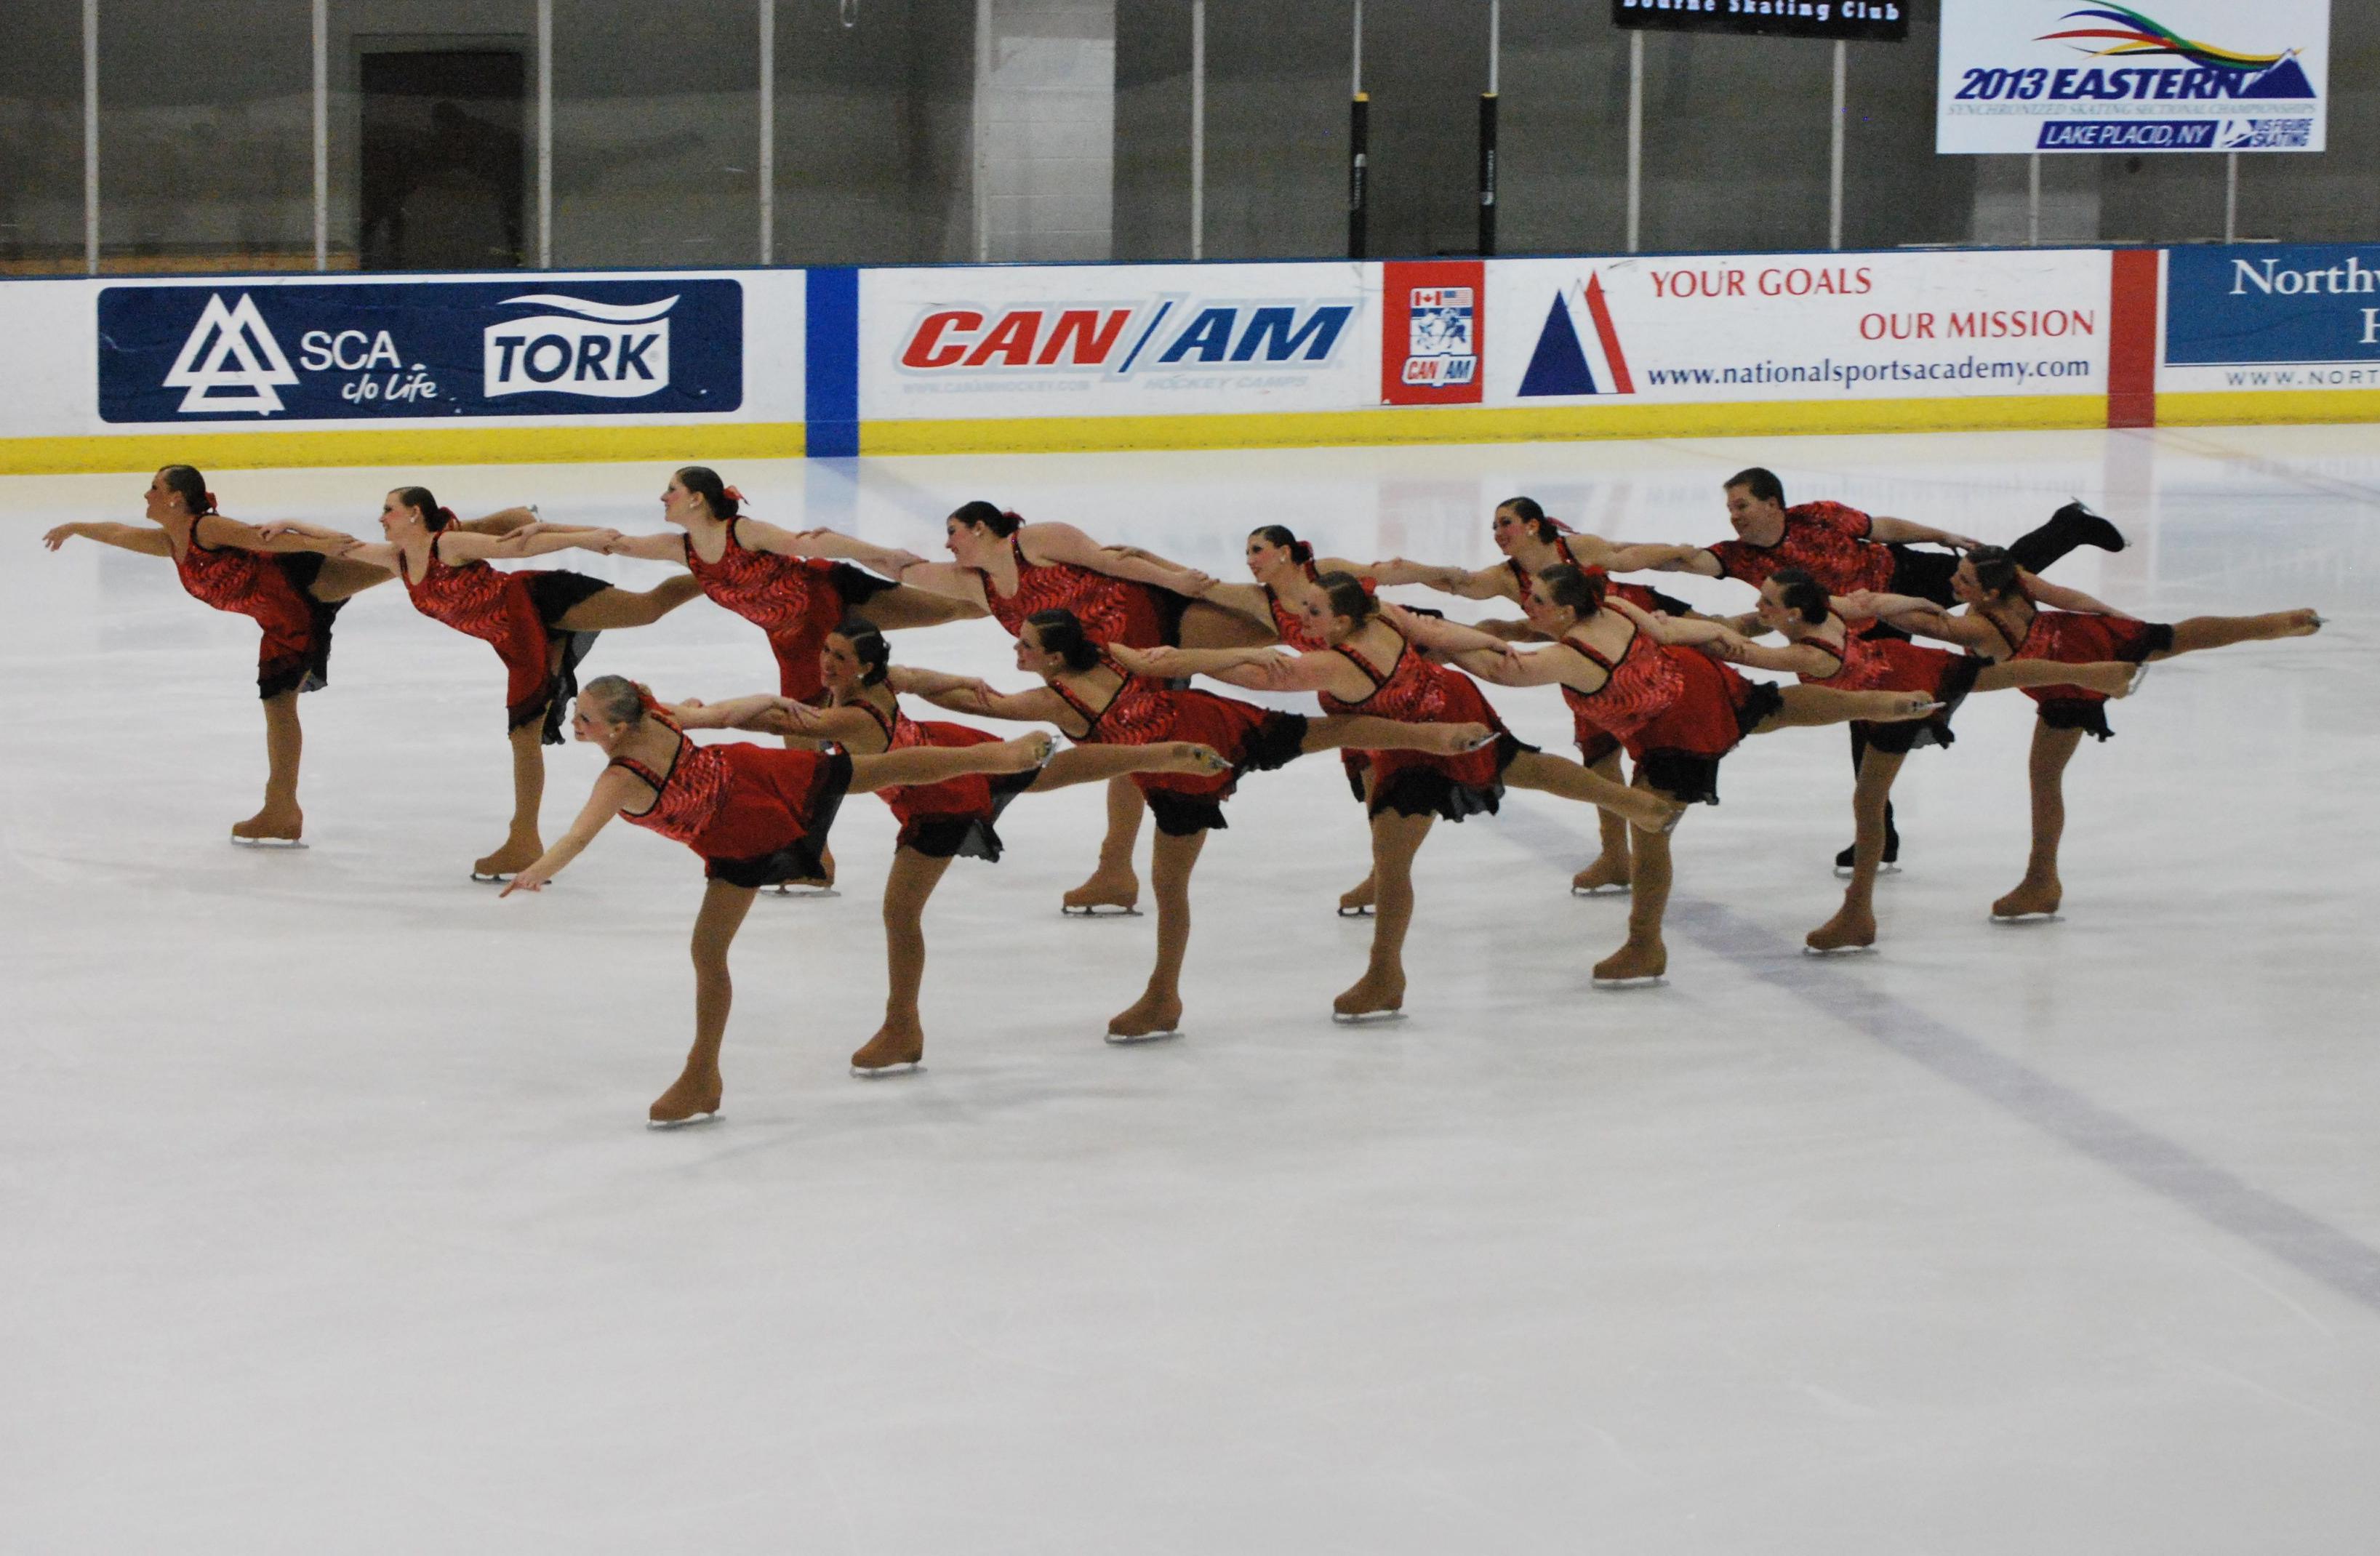 2013 Eastern Synchronized Skating Sectional Championships - Figure Skating , HD Wallpaper & Backgrounds